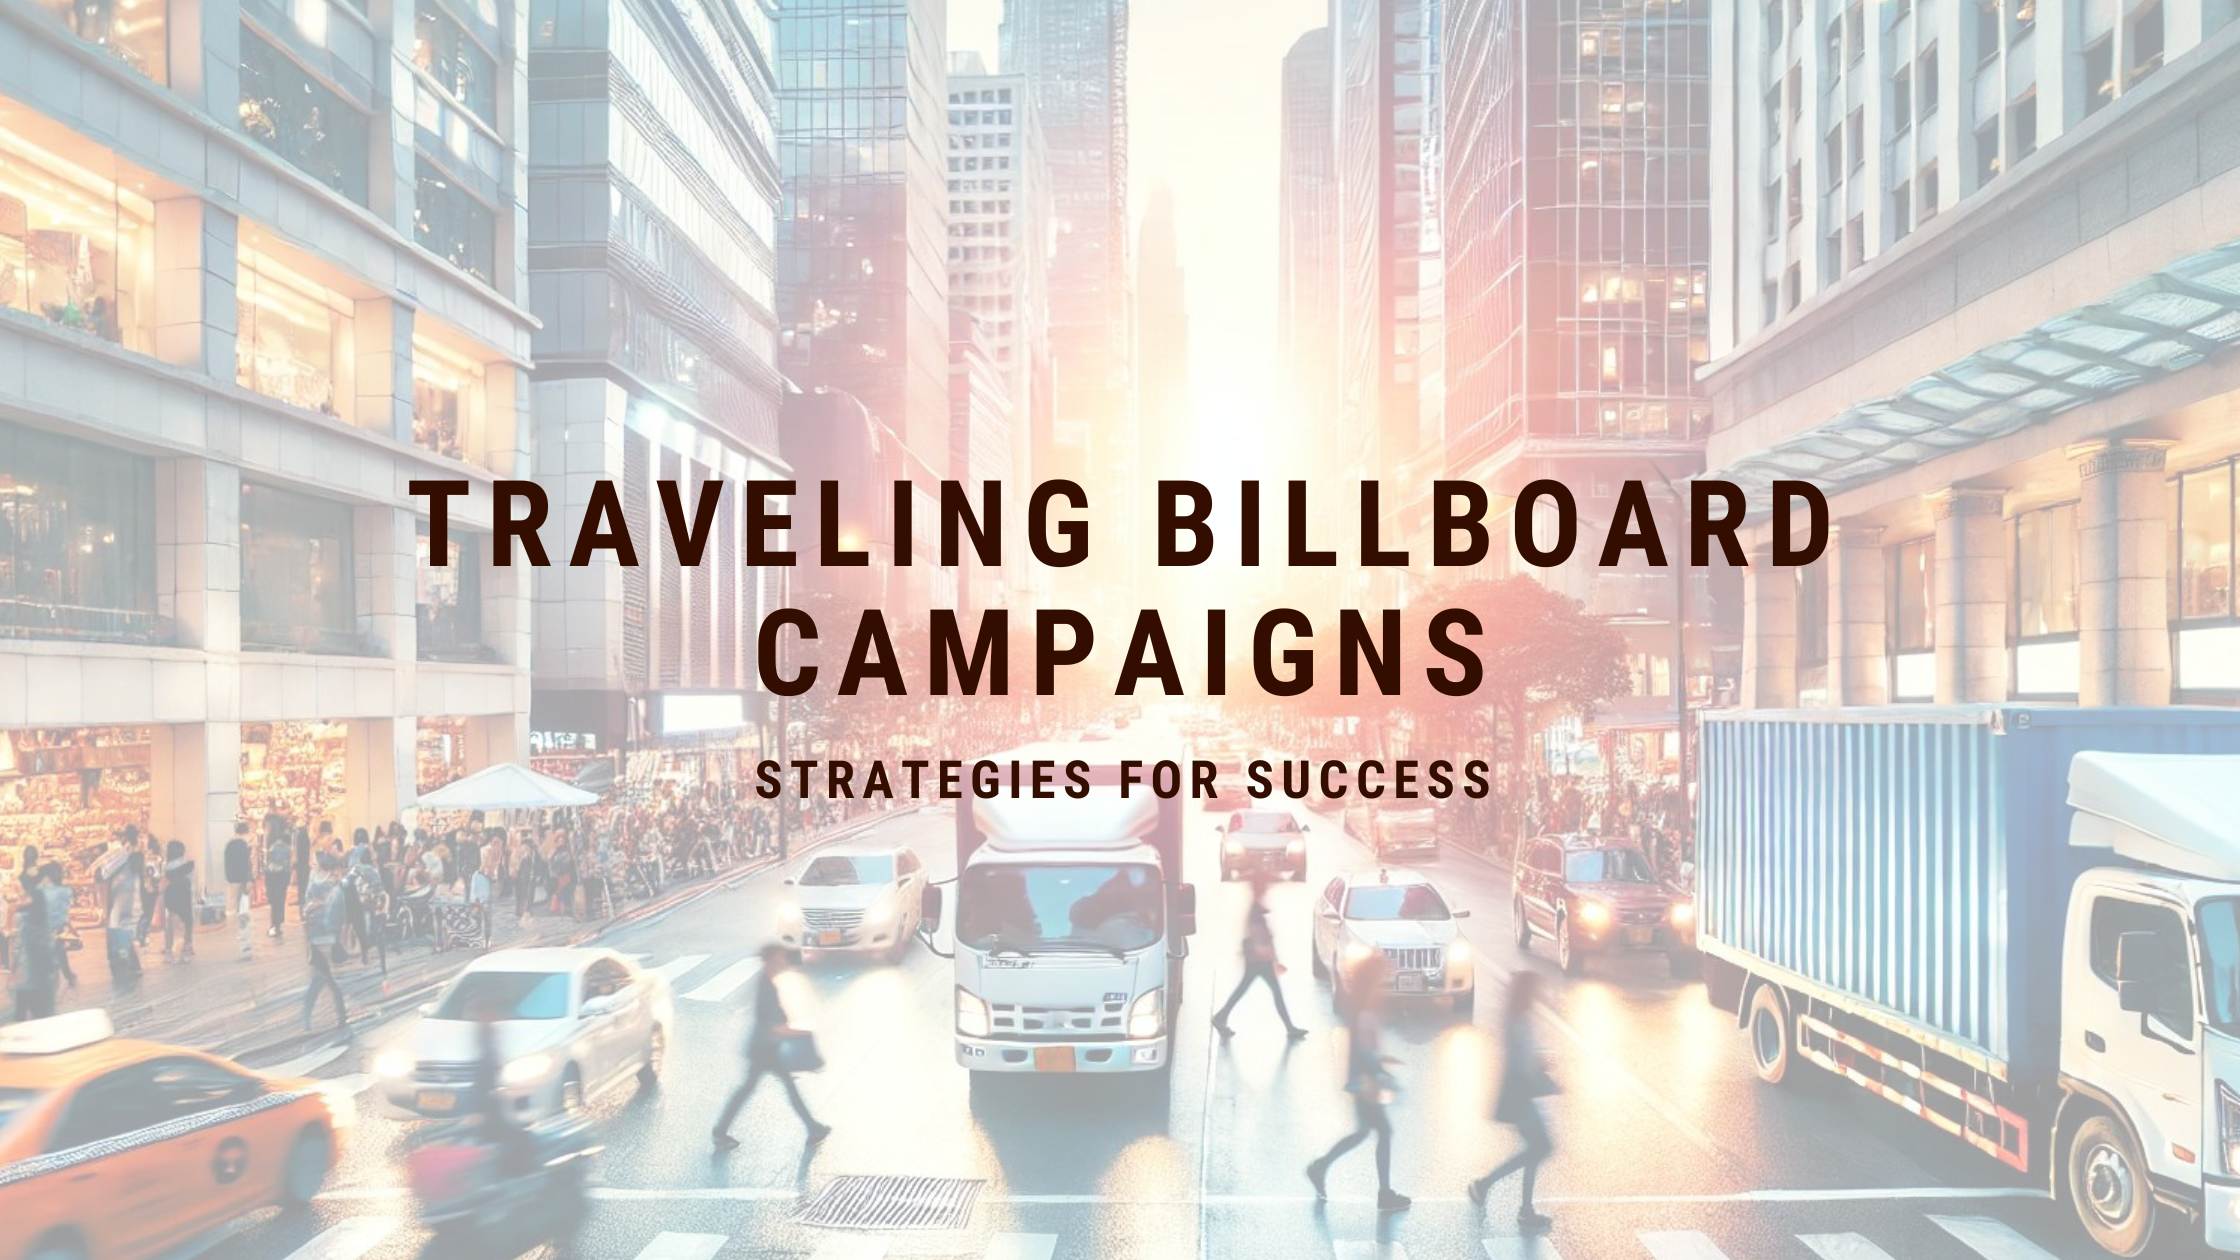 Cityscape with busy streets and pedestrians, featuring the text 'Traveling Billboard Campaigns: Strategies for Success' overlaid on the image.